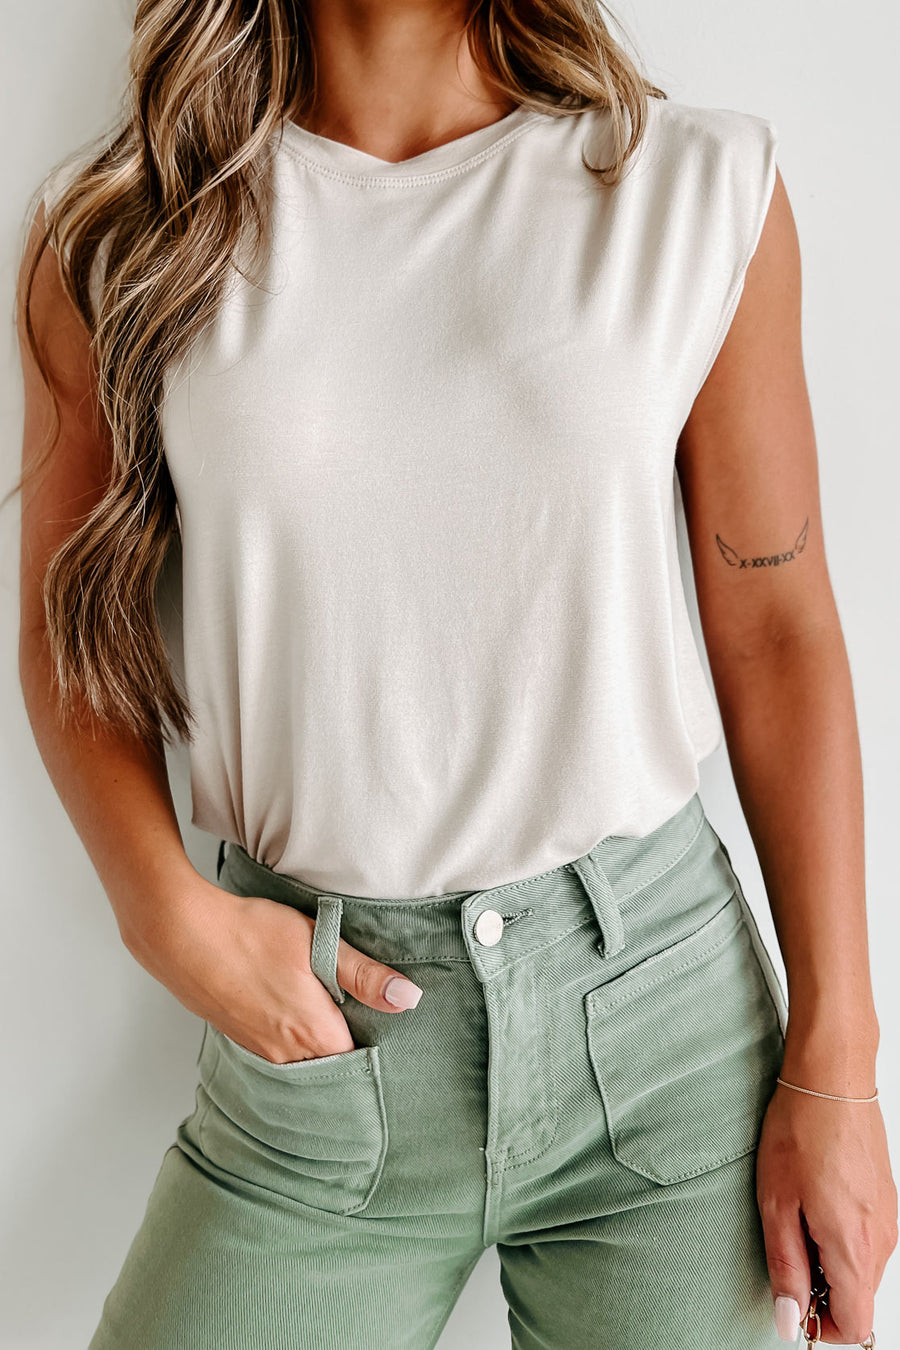 Couldn't Care Less Solid Knit Muscle Tee (Oatmeal) - NanaMacs